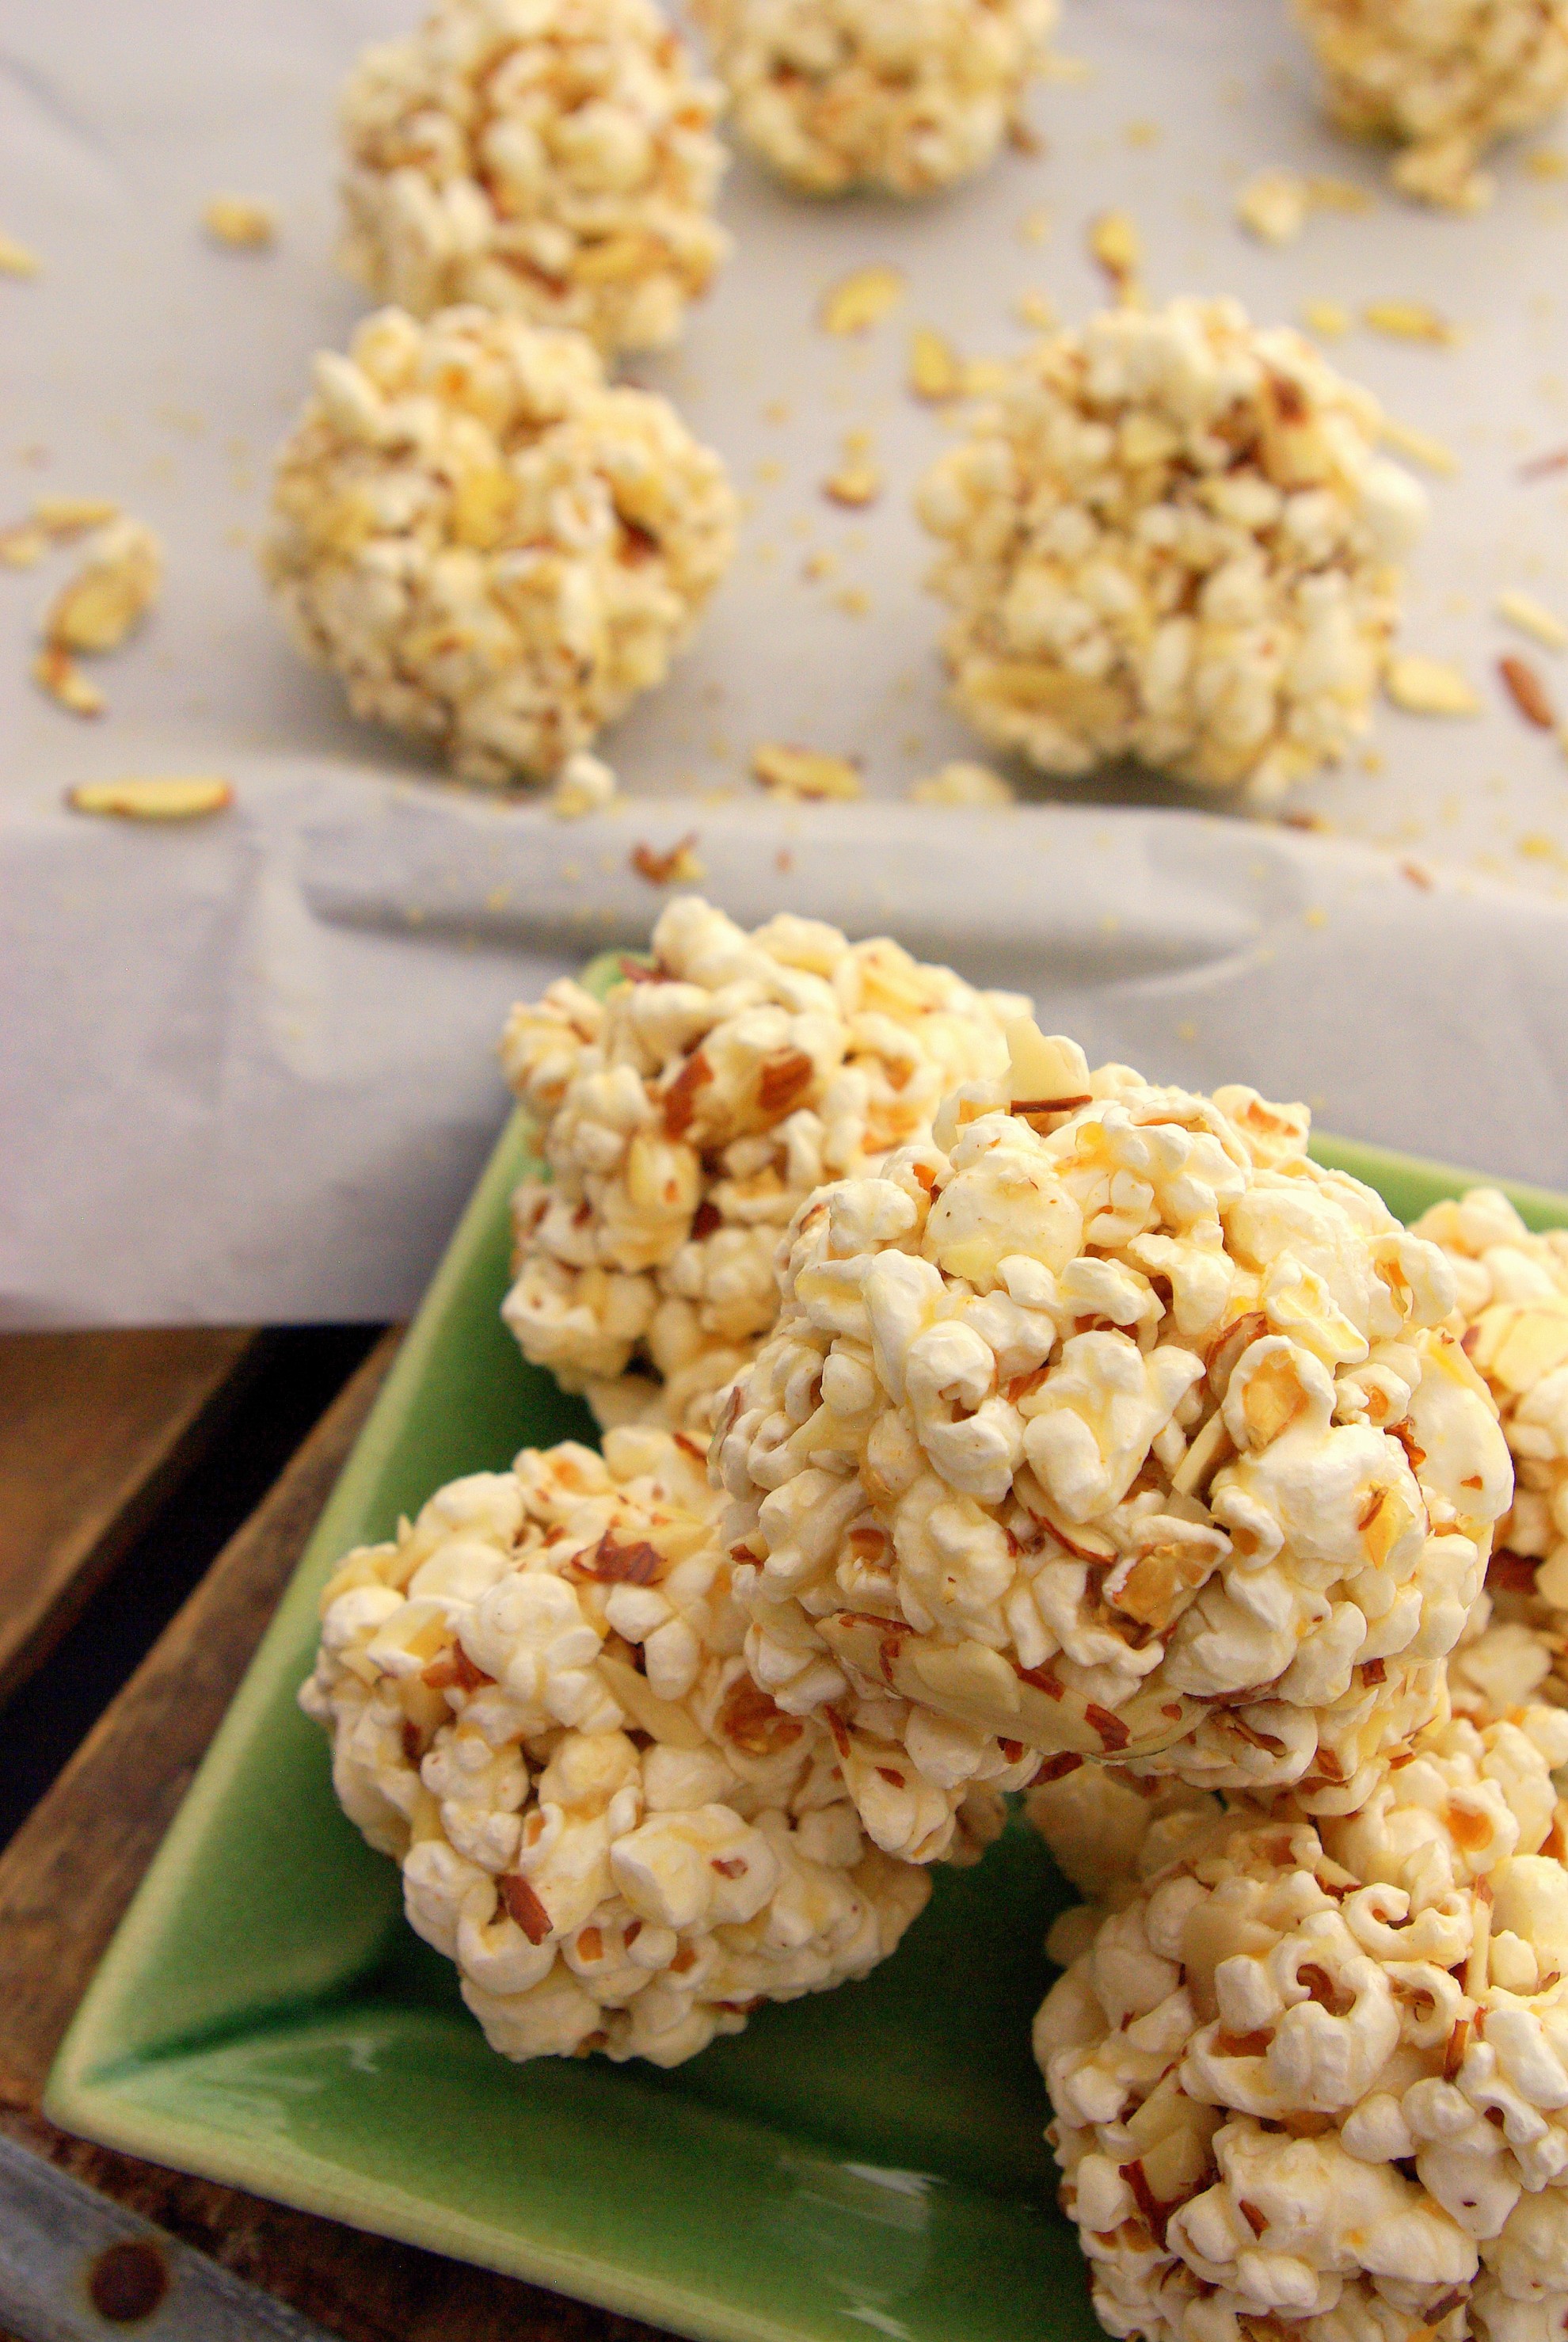 BAKED ALMOND MISO POPCORN BALLS WITH HONEY AND GINGER